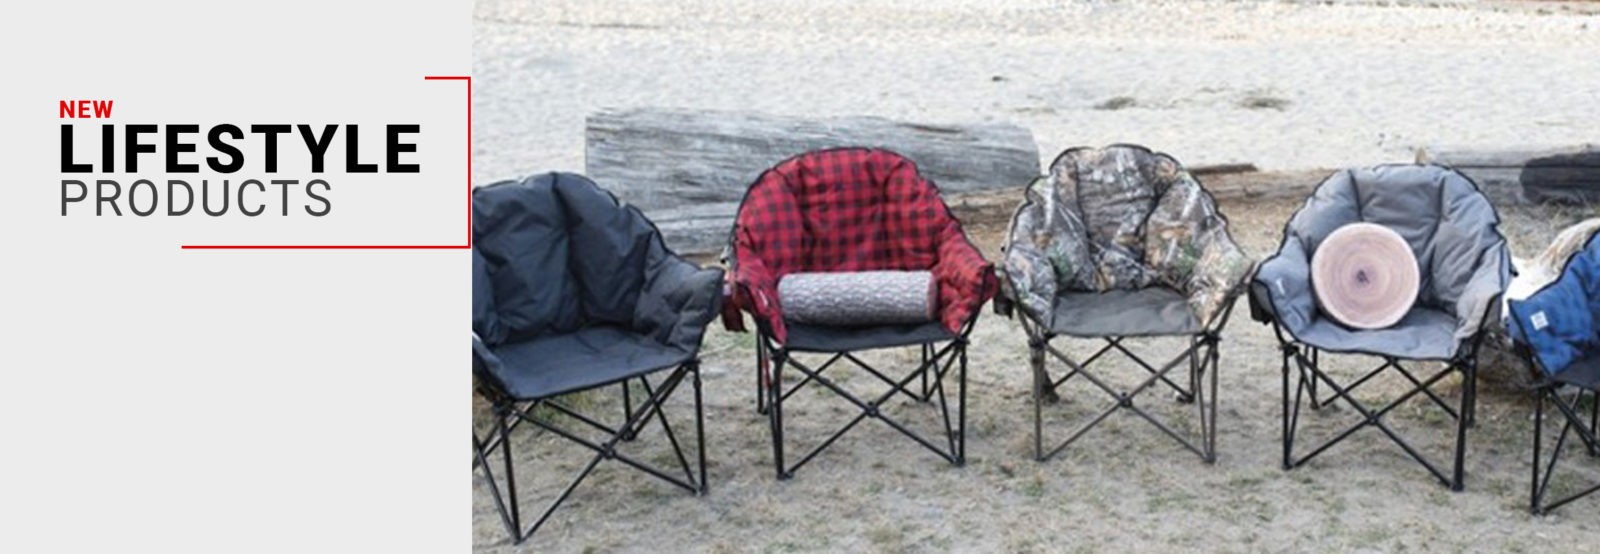 Camping Blankets